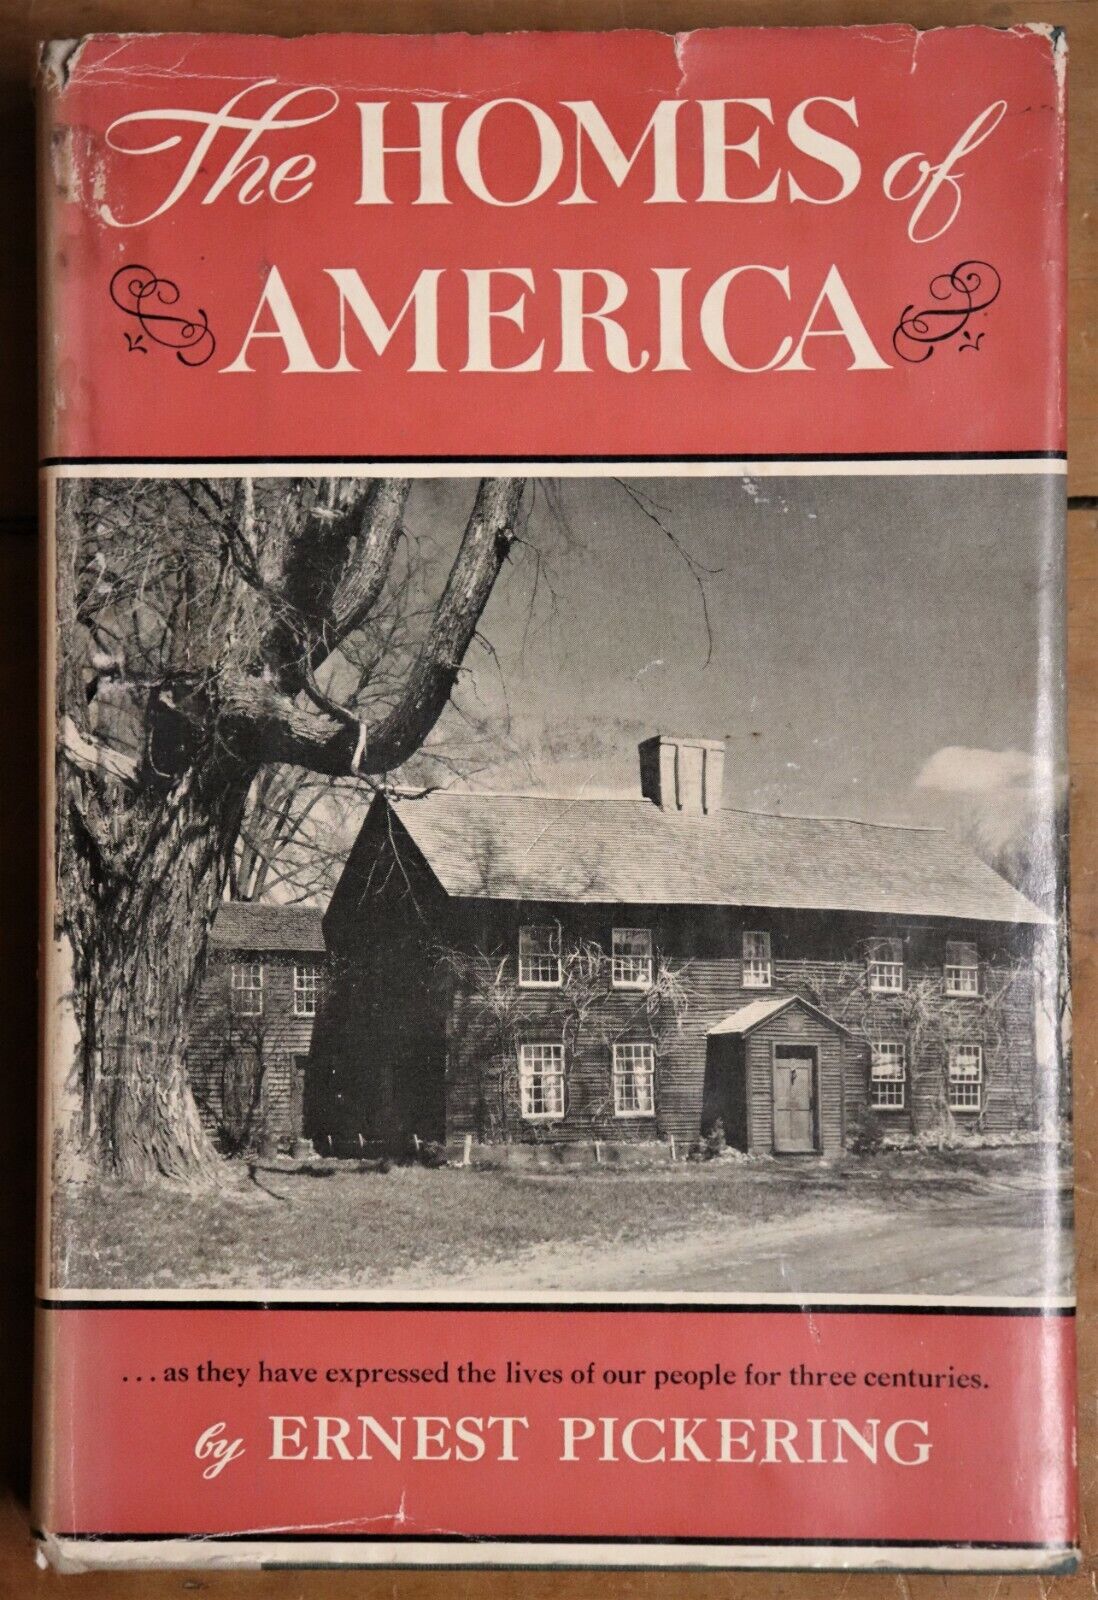 The Homes of America - 1951 - Antique Architecture Book - Ernest Pickering